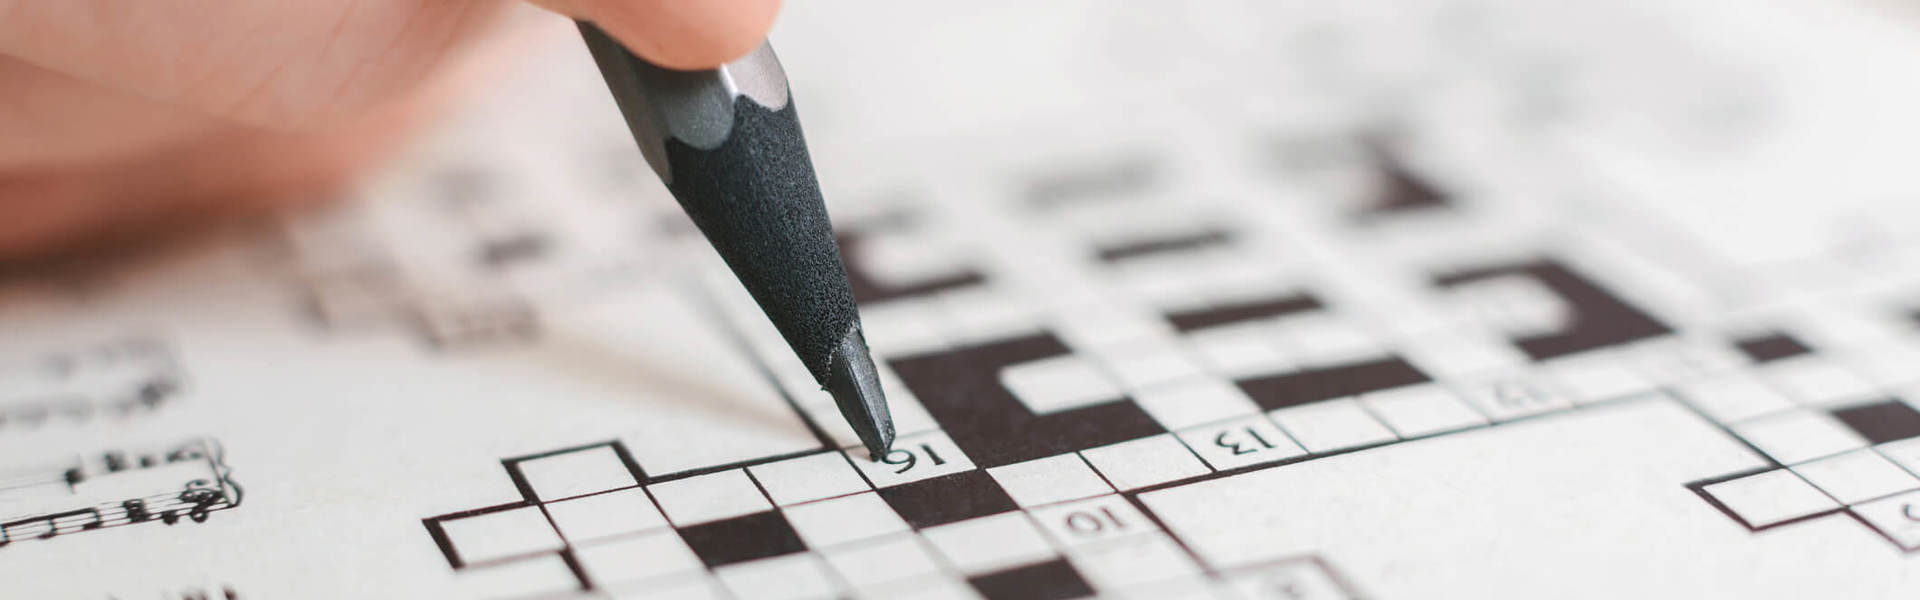 a close up of a person completing a crossword puzzle using a pencil